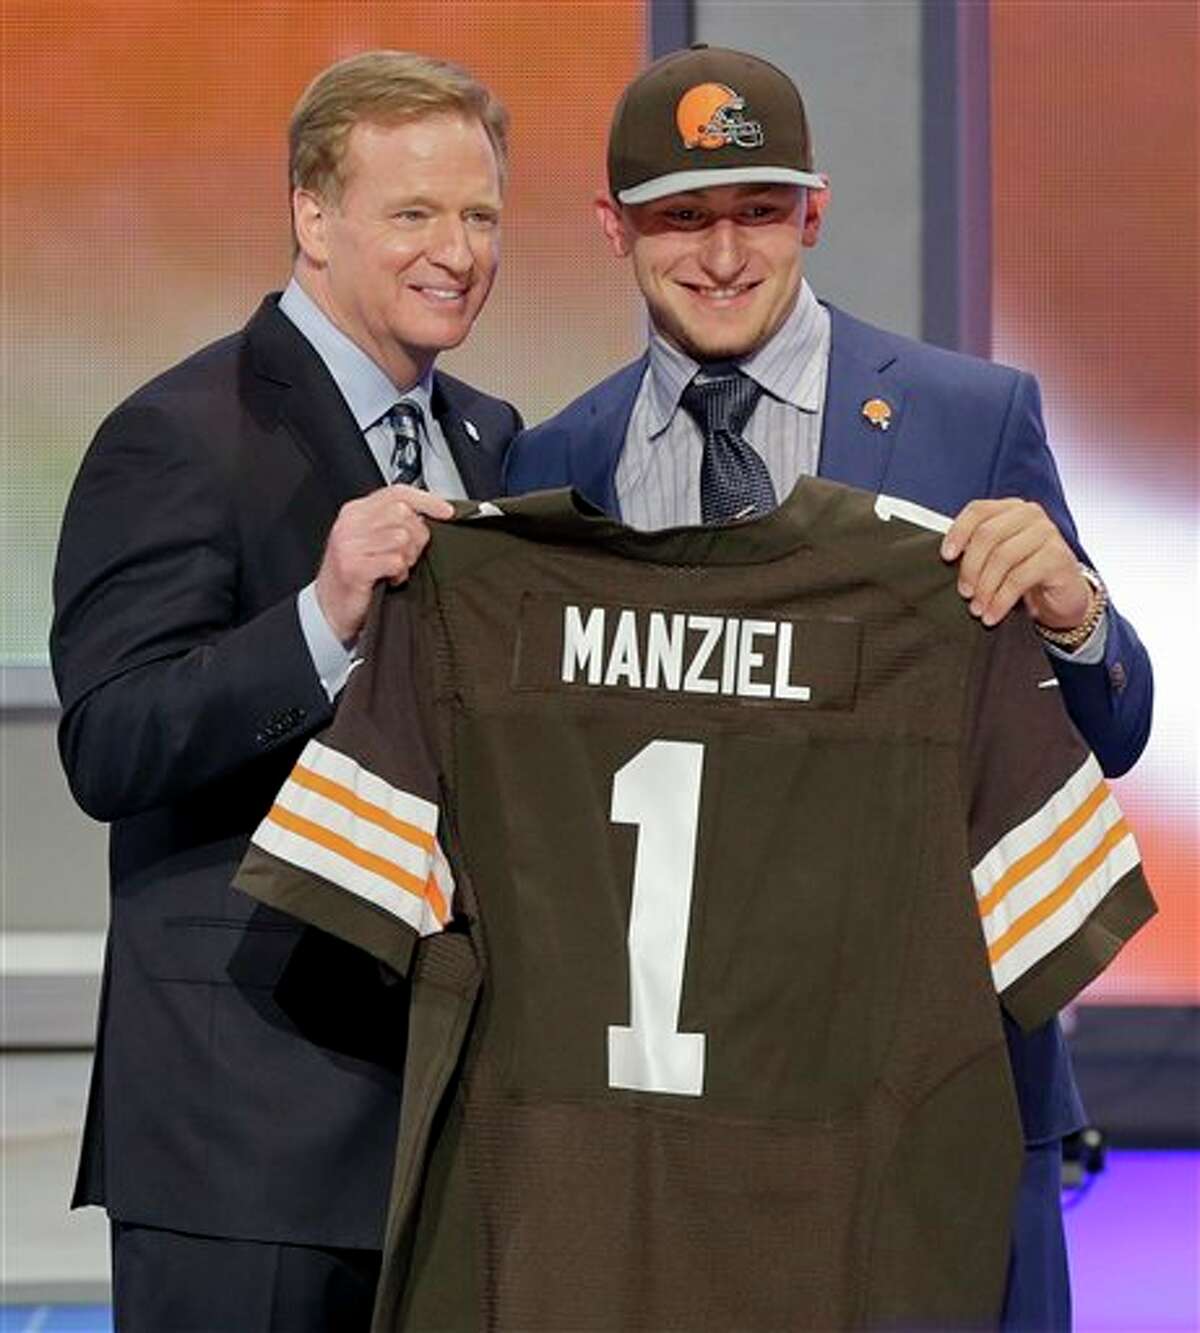 Texas A&M quarterback Johnny Manziel poses with NFL commissioner Roger Goodell after being selected by the Cleveland Browns as the 22nd pick in the first round of the 2014 NFL Draft, Thursday, May 8, 2014, in New York. (AP Photo/Frank Franklin II)